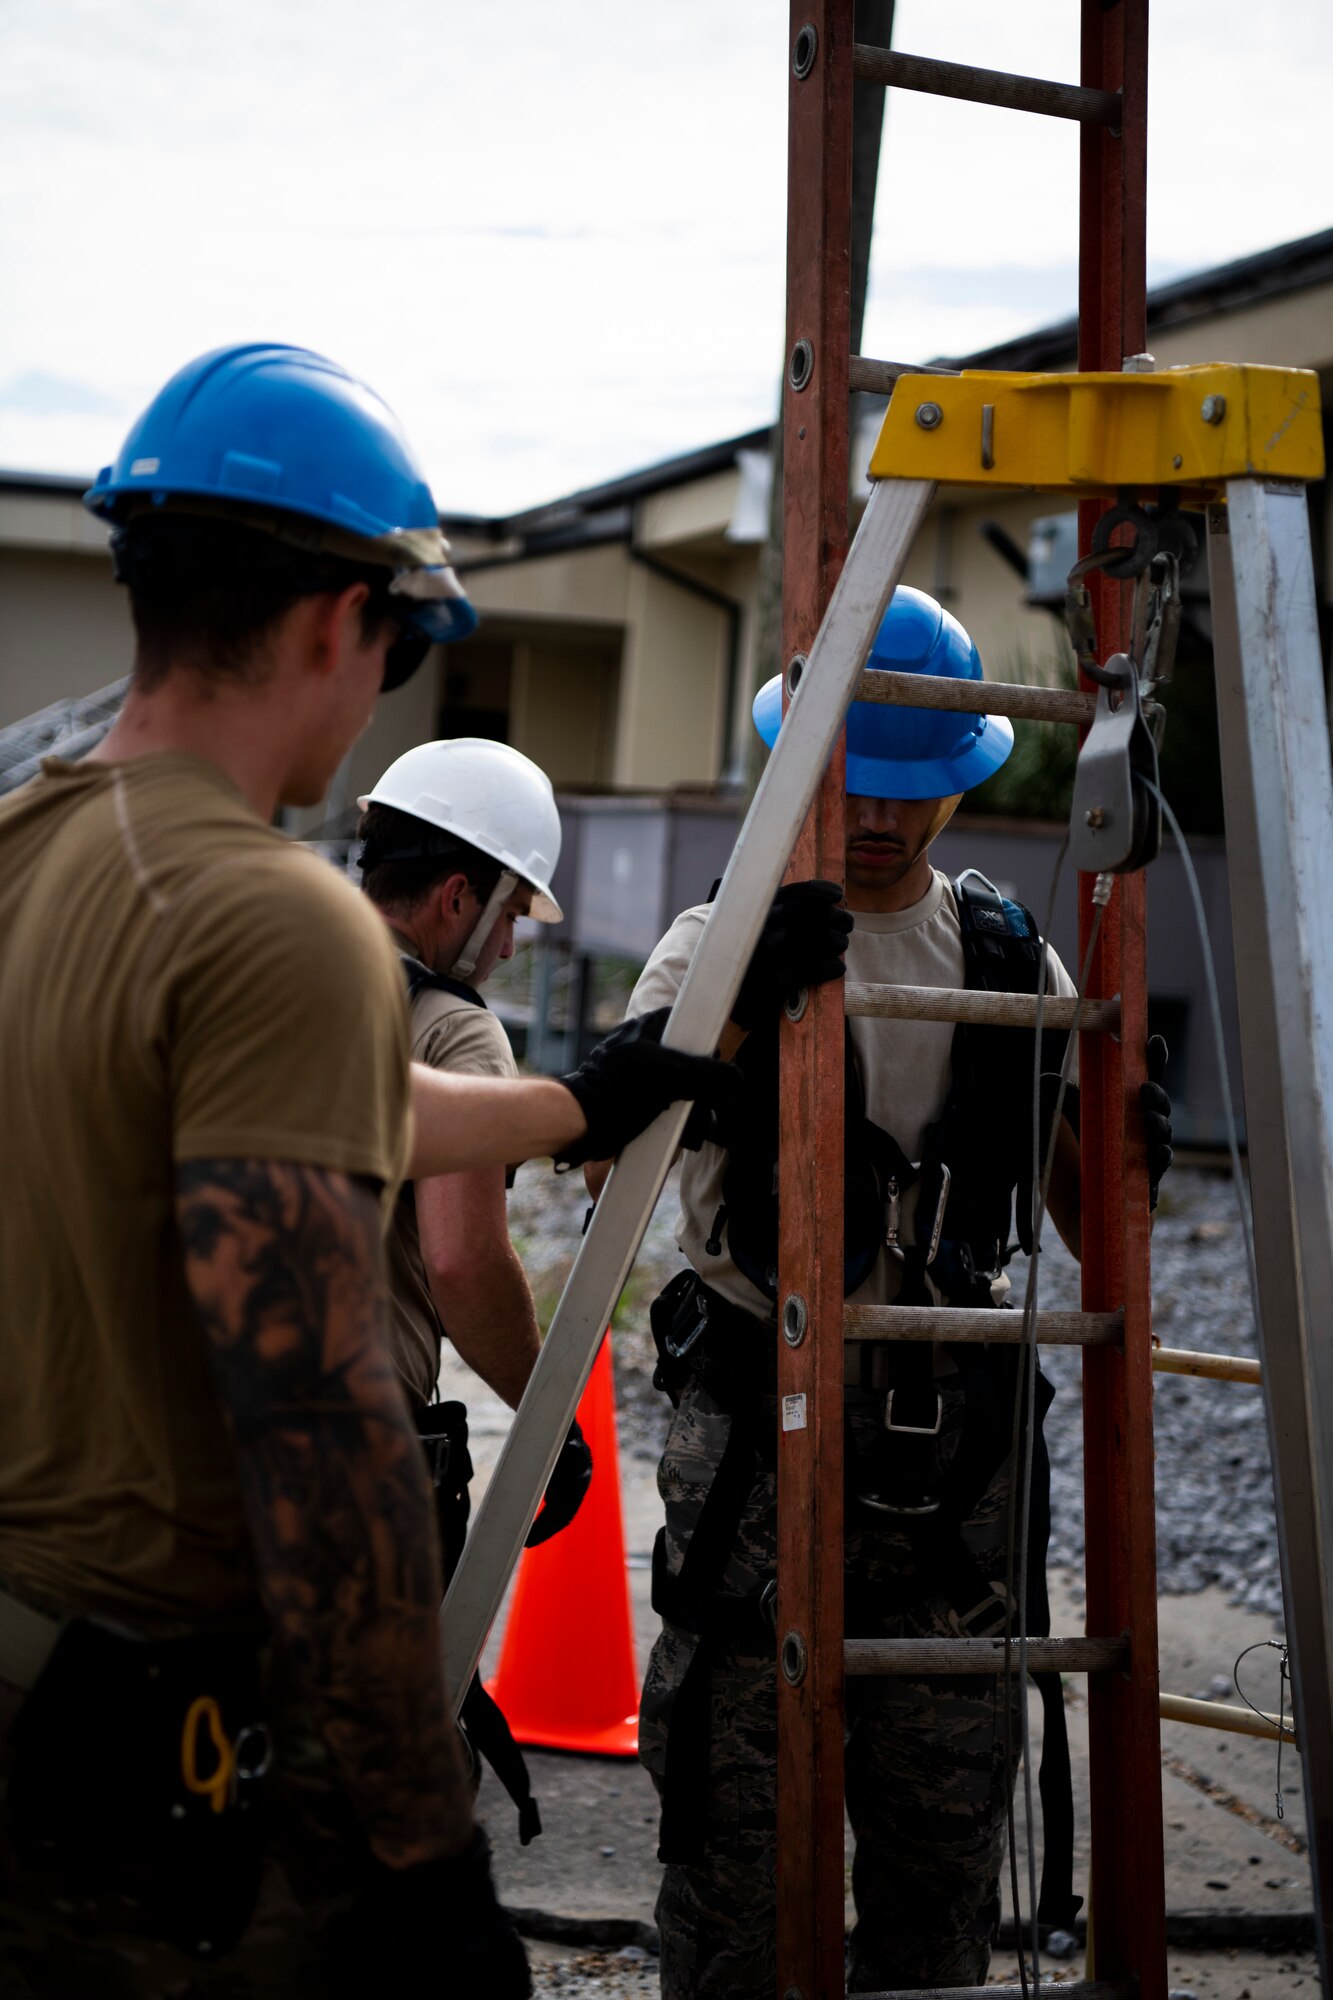 U.S. Air Force Senior Airman Trent Olson, left, Airman 1st Class Emmanuel Jackson-Wilson, right, cable antenna systems technicians with the 85th Engineering Installation Squadron assigned to Keesler Air Force Base, Mississippi, help Staff Sgt. Jesse Laclair, center, 85th EIS cable antenna systems technician, exit a manhole at Tyndall Air Force Base, Florida, Aug. 28, 2020. The 85th EIS is assisting the 325th Communications Squadron to move information transfer nodes from damaged buildings, which will improve network stability. (U.S. Air Force photo by Tech. Sgt. Clayton Lenhardt)